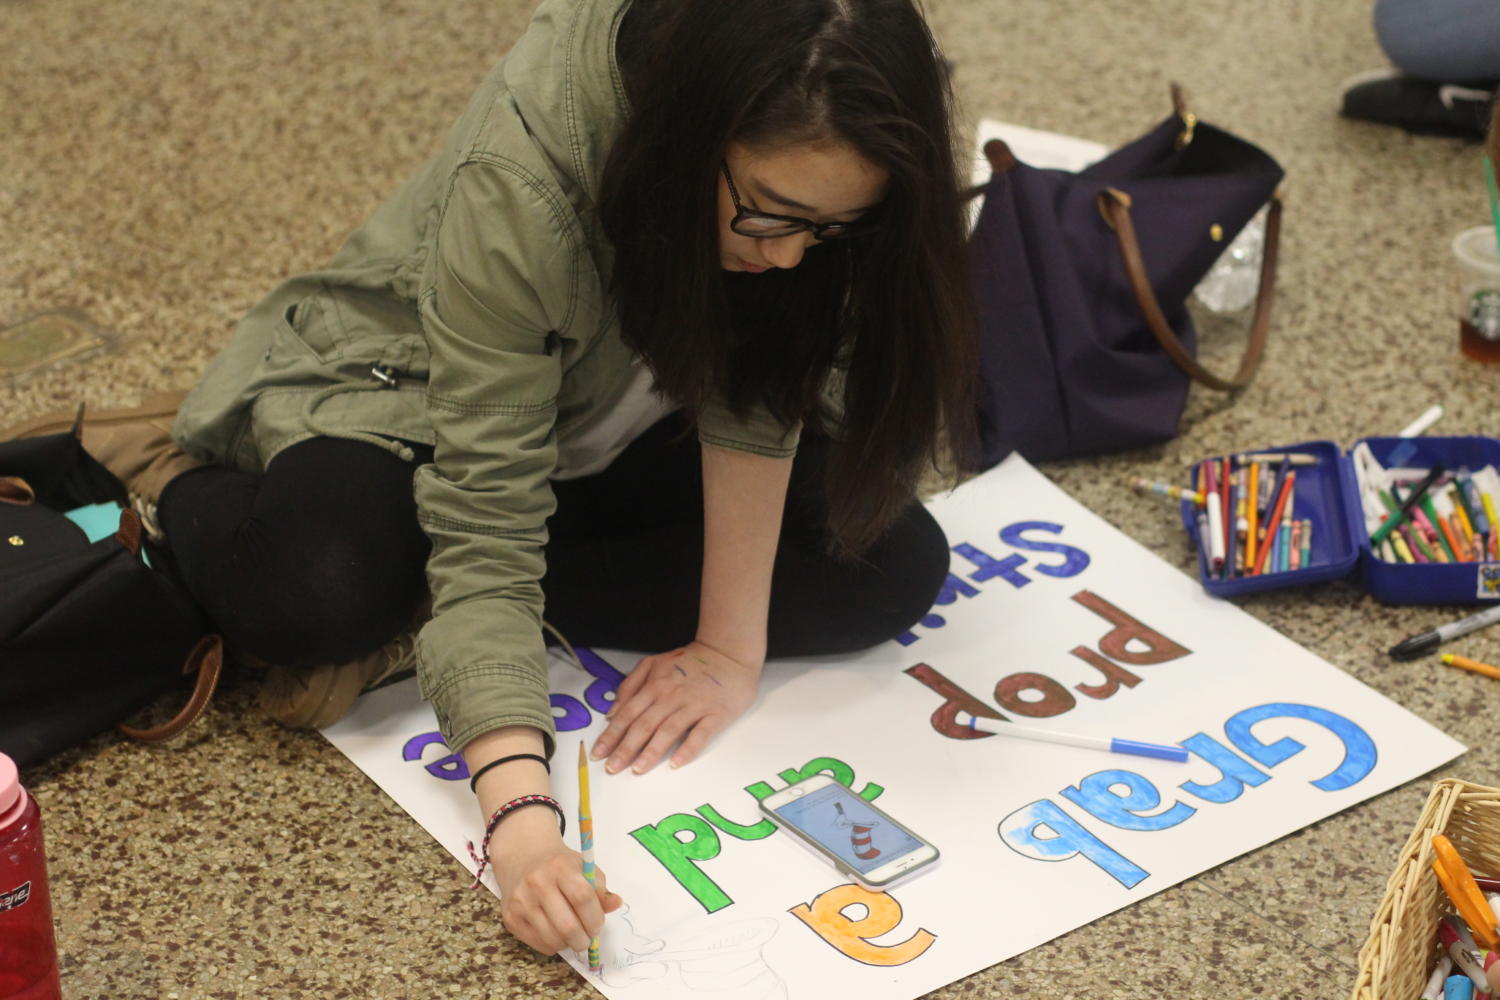 Relay for Life Committee members prepare posters for fundraising efforts.